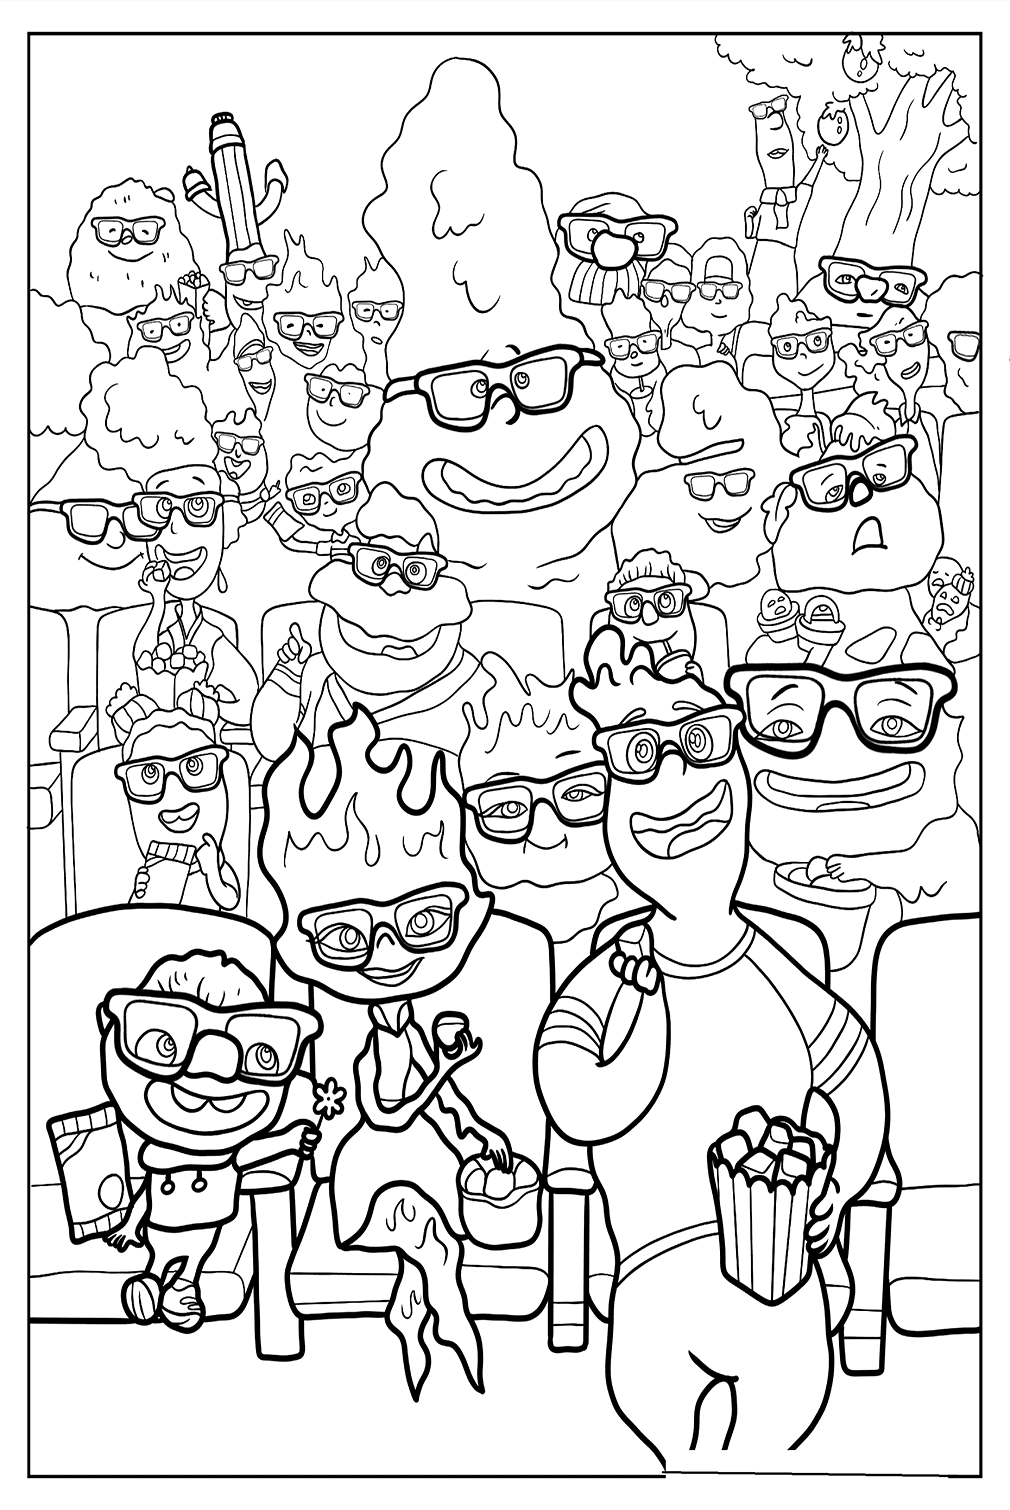 Elemental Characters Coloring Page from Elemental